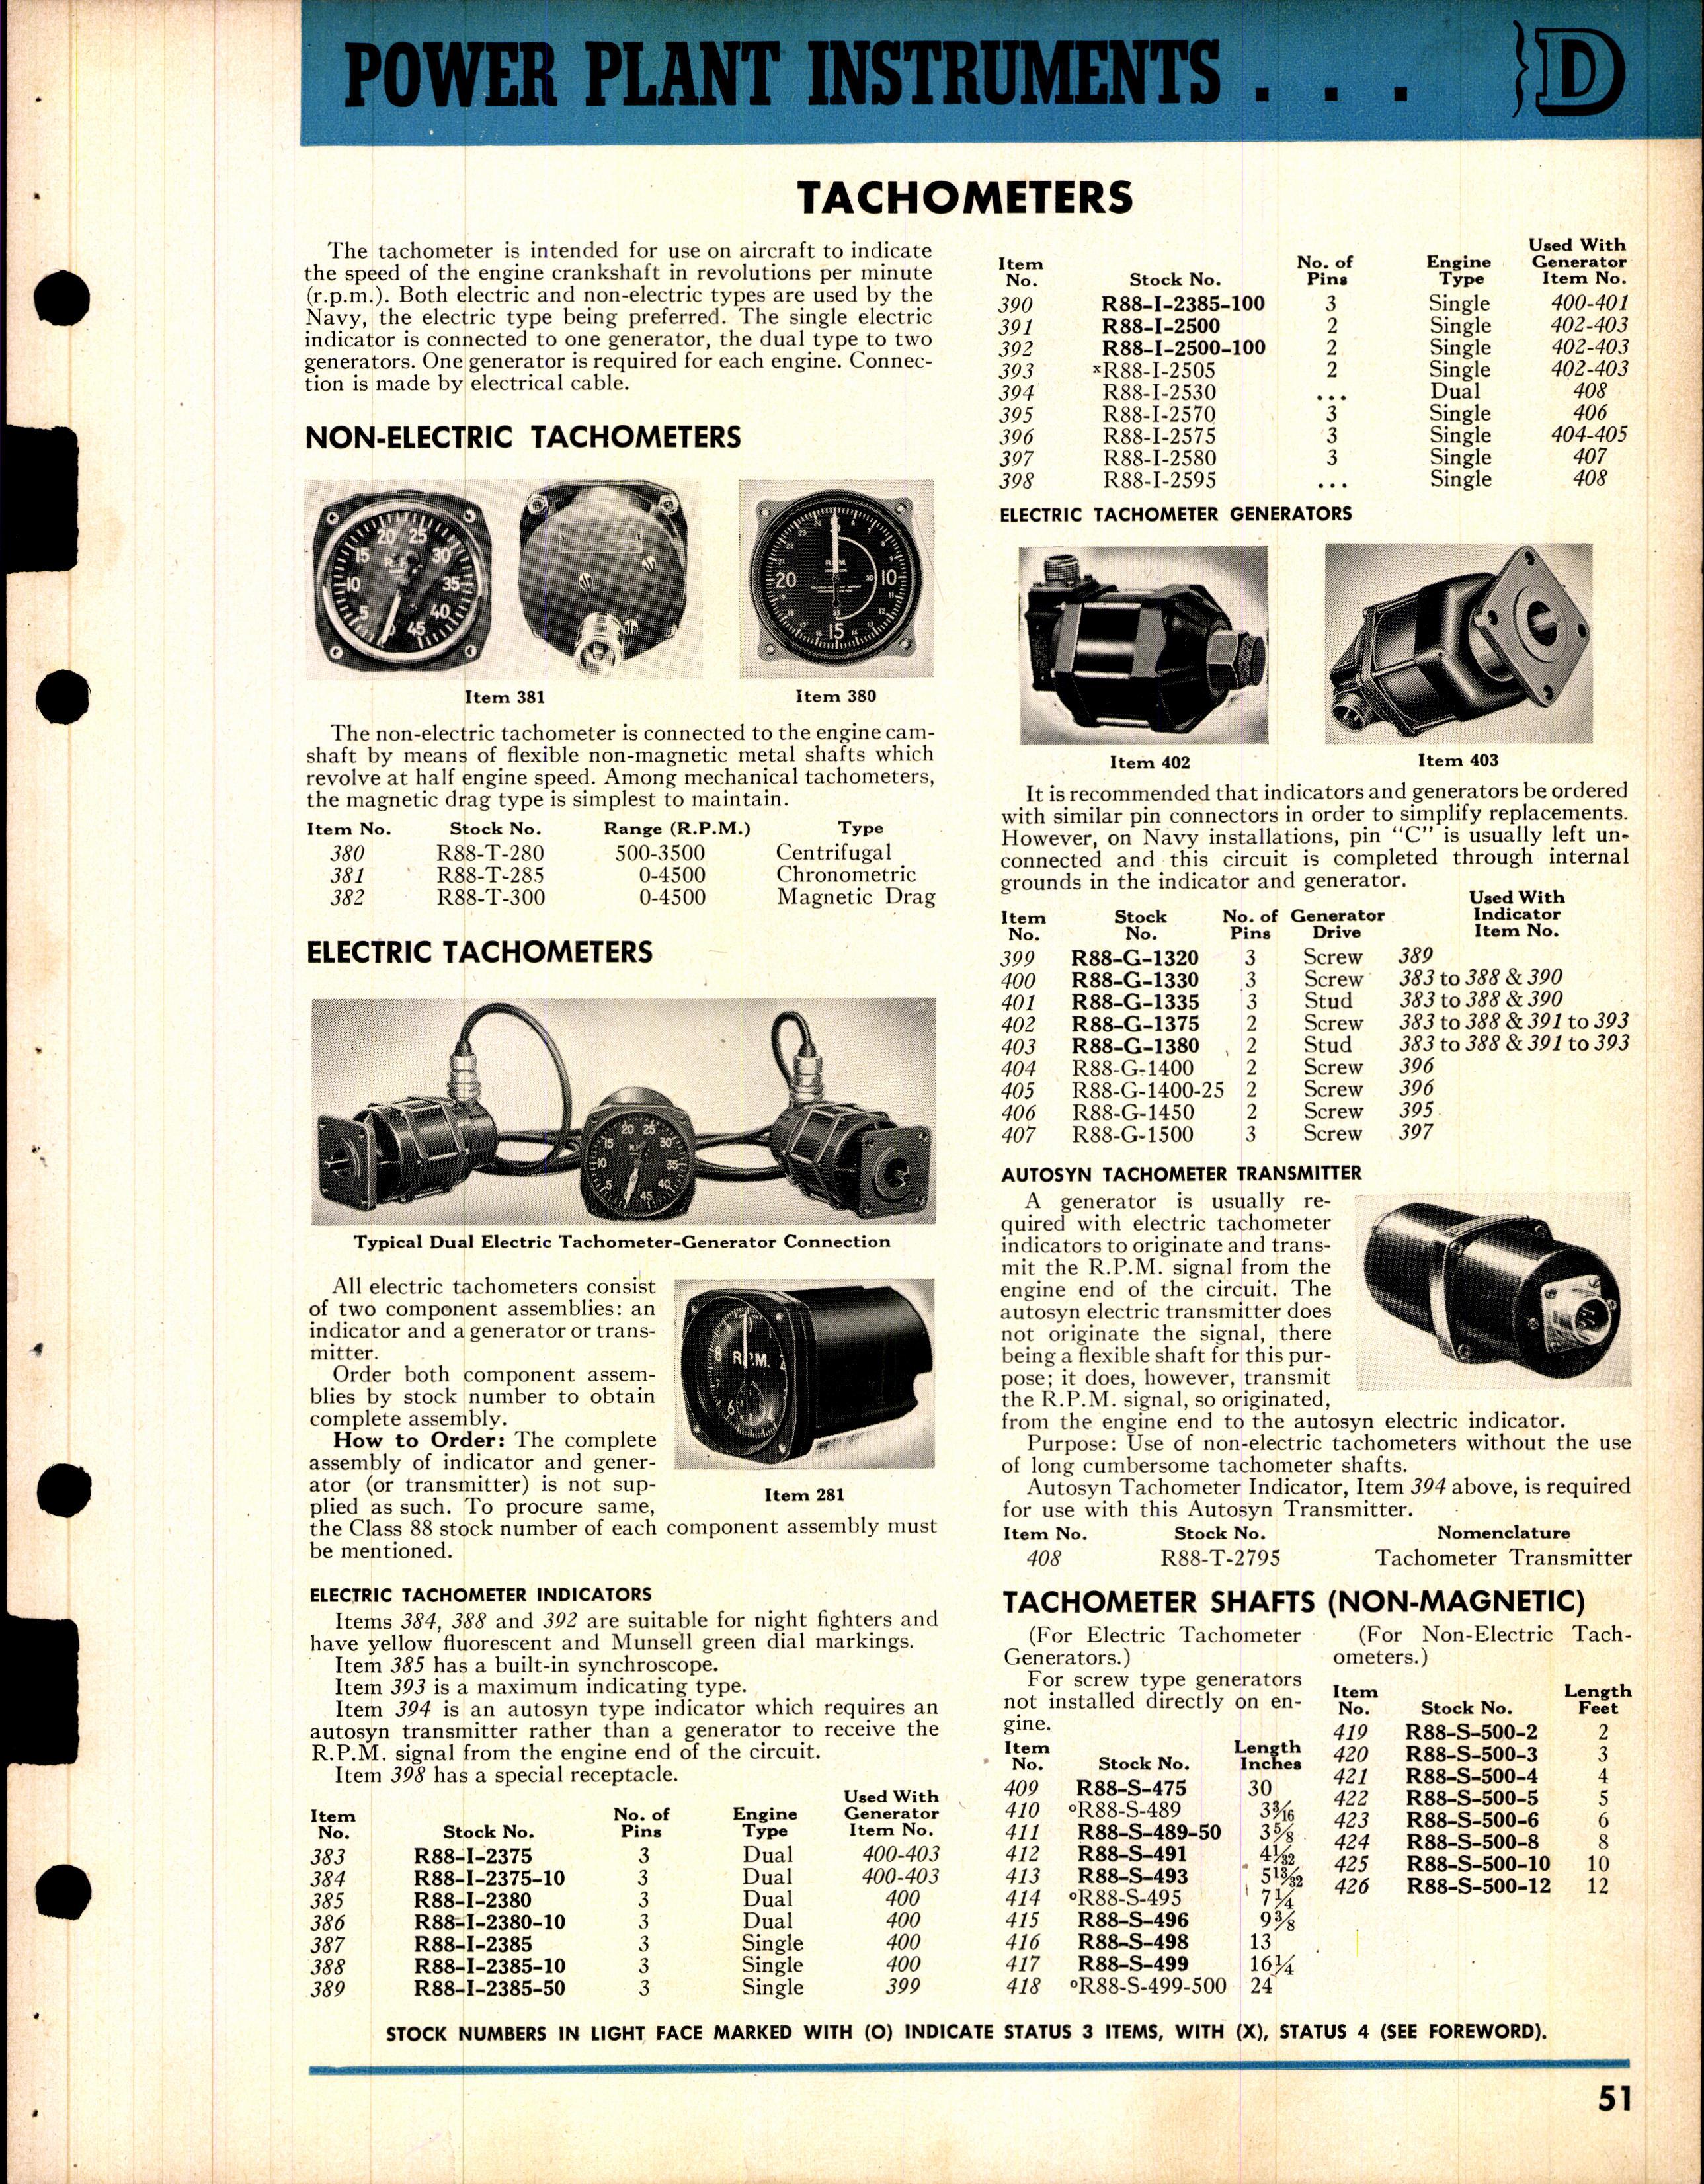 Sample page 51 from AirCorps Library document: Aeronautical Instruments